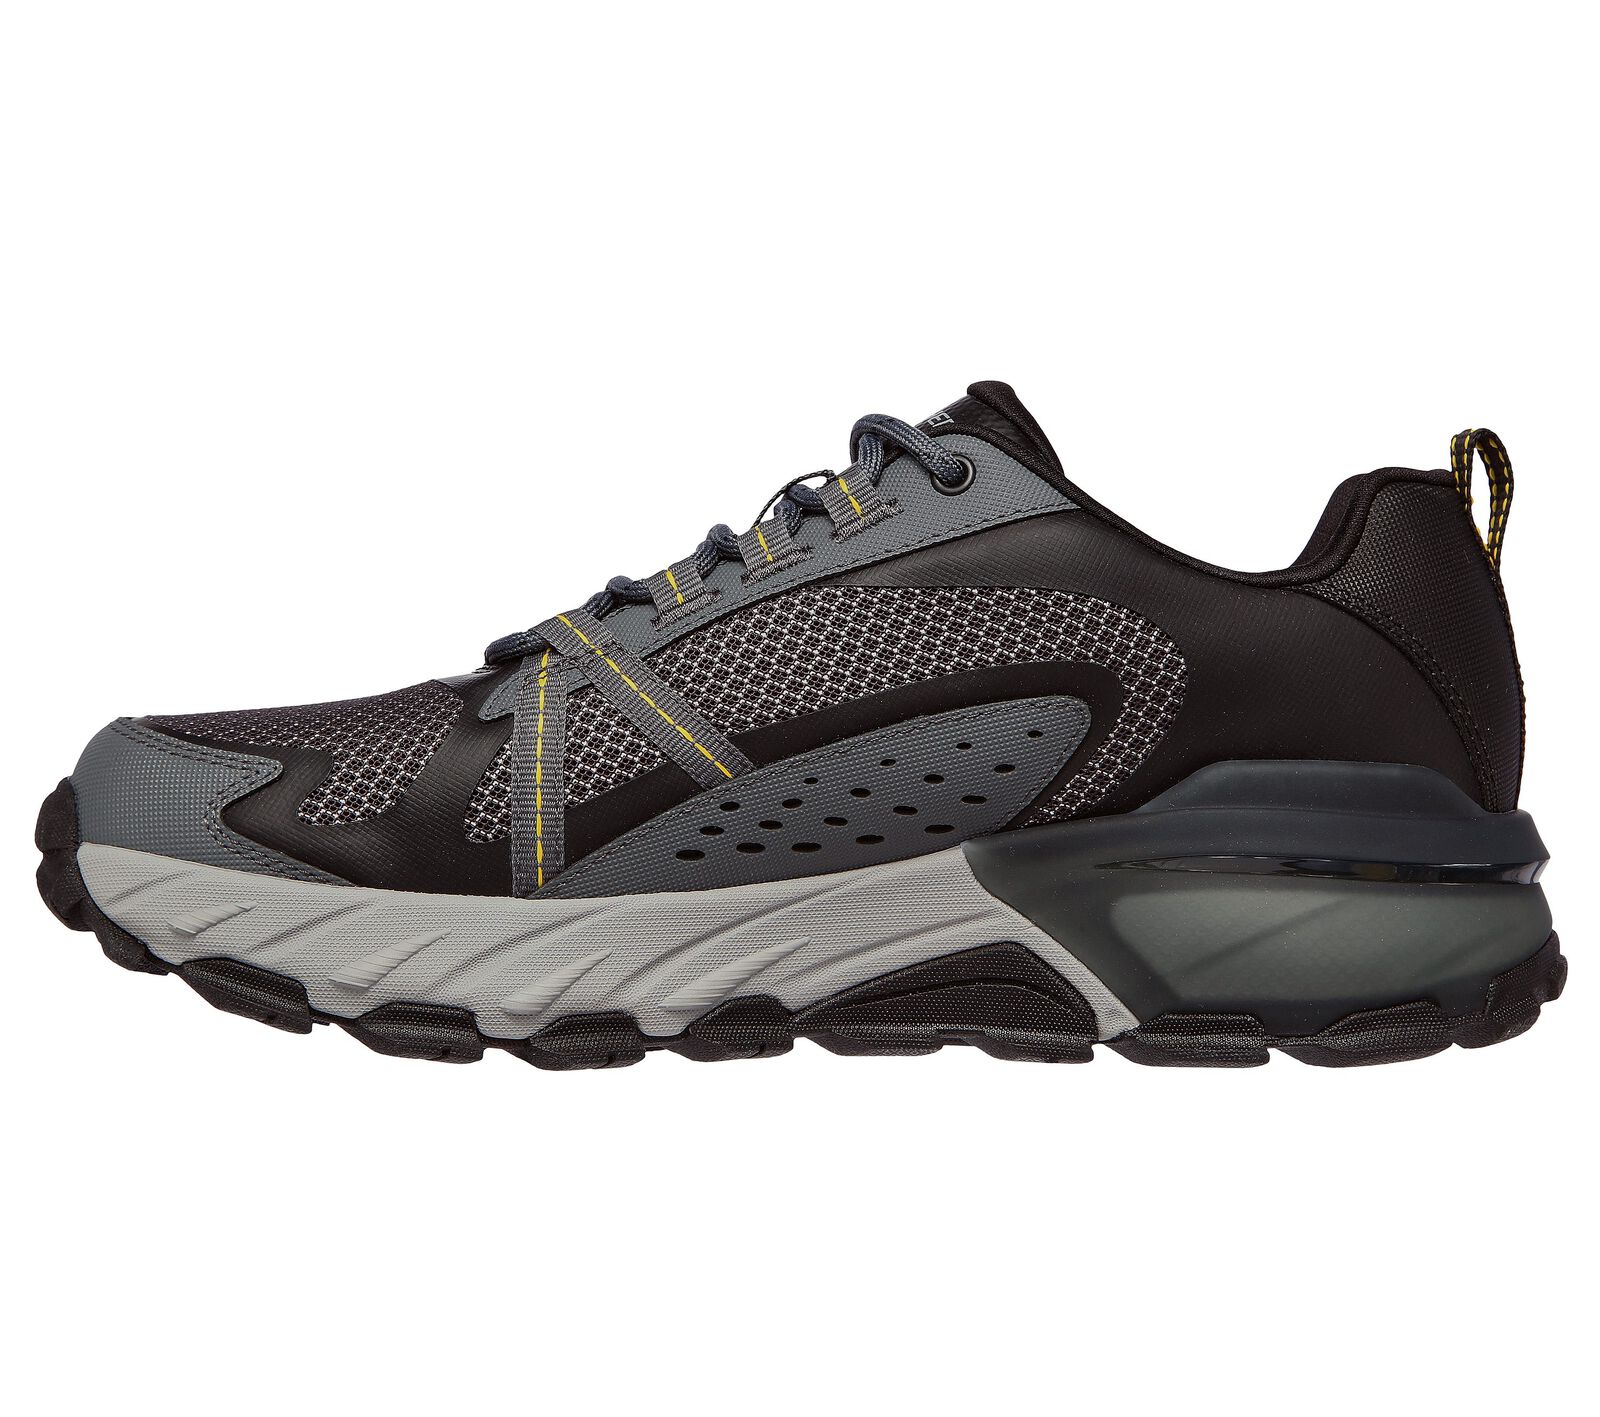 Shop the Skechers Max Protect | SKECHERS